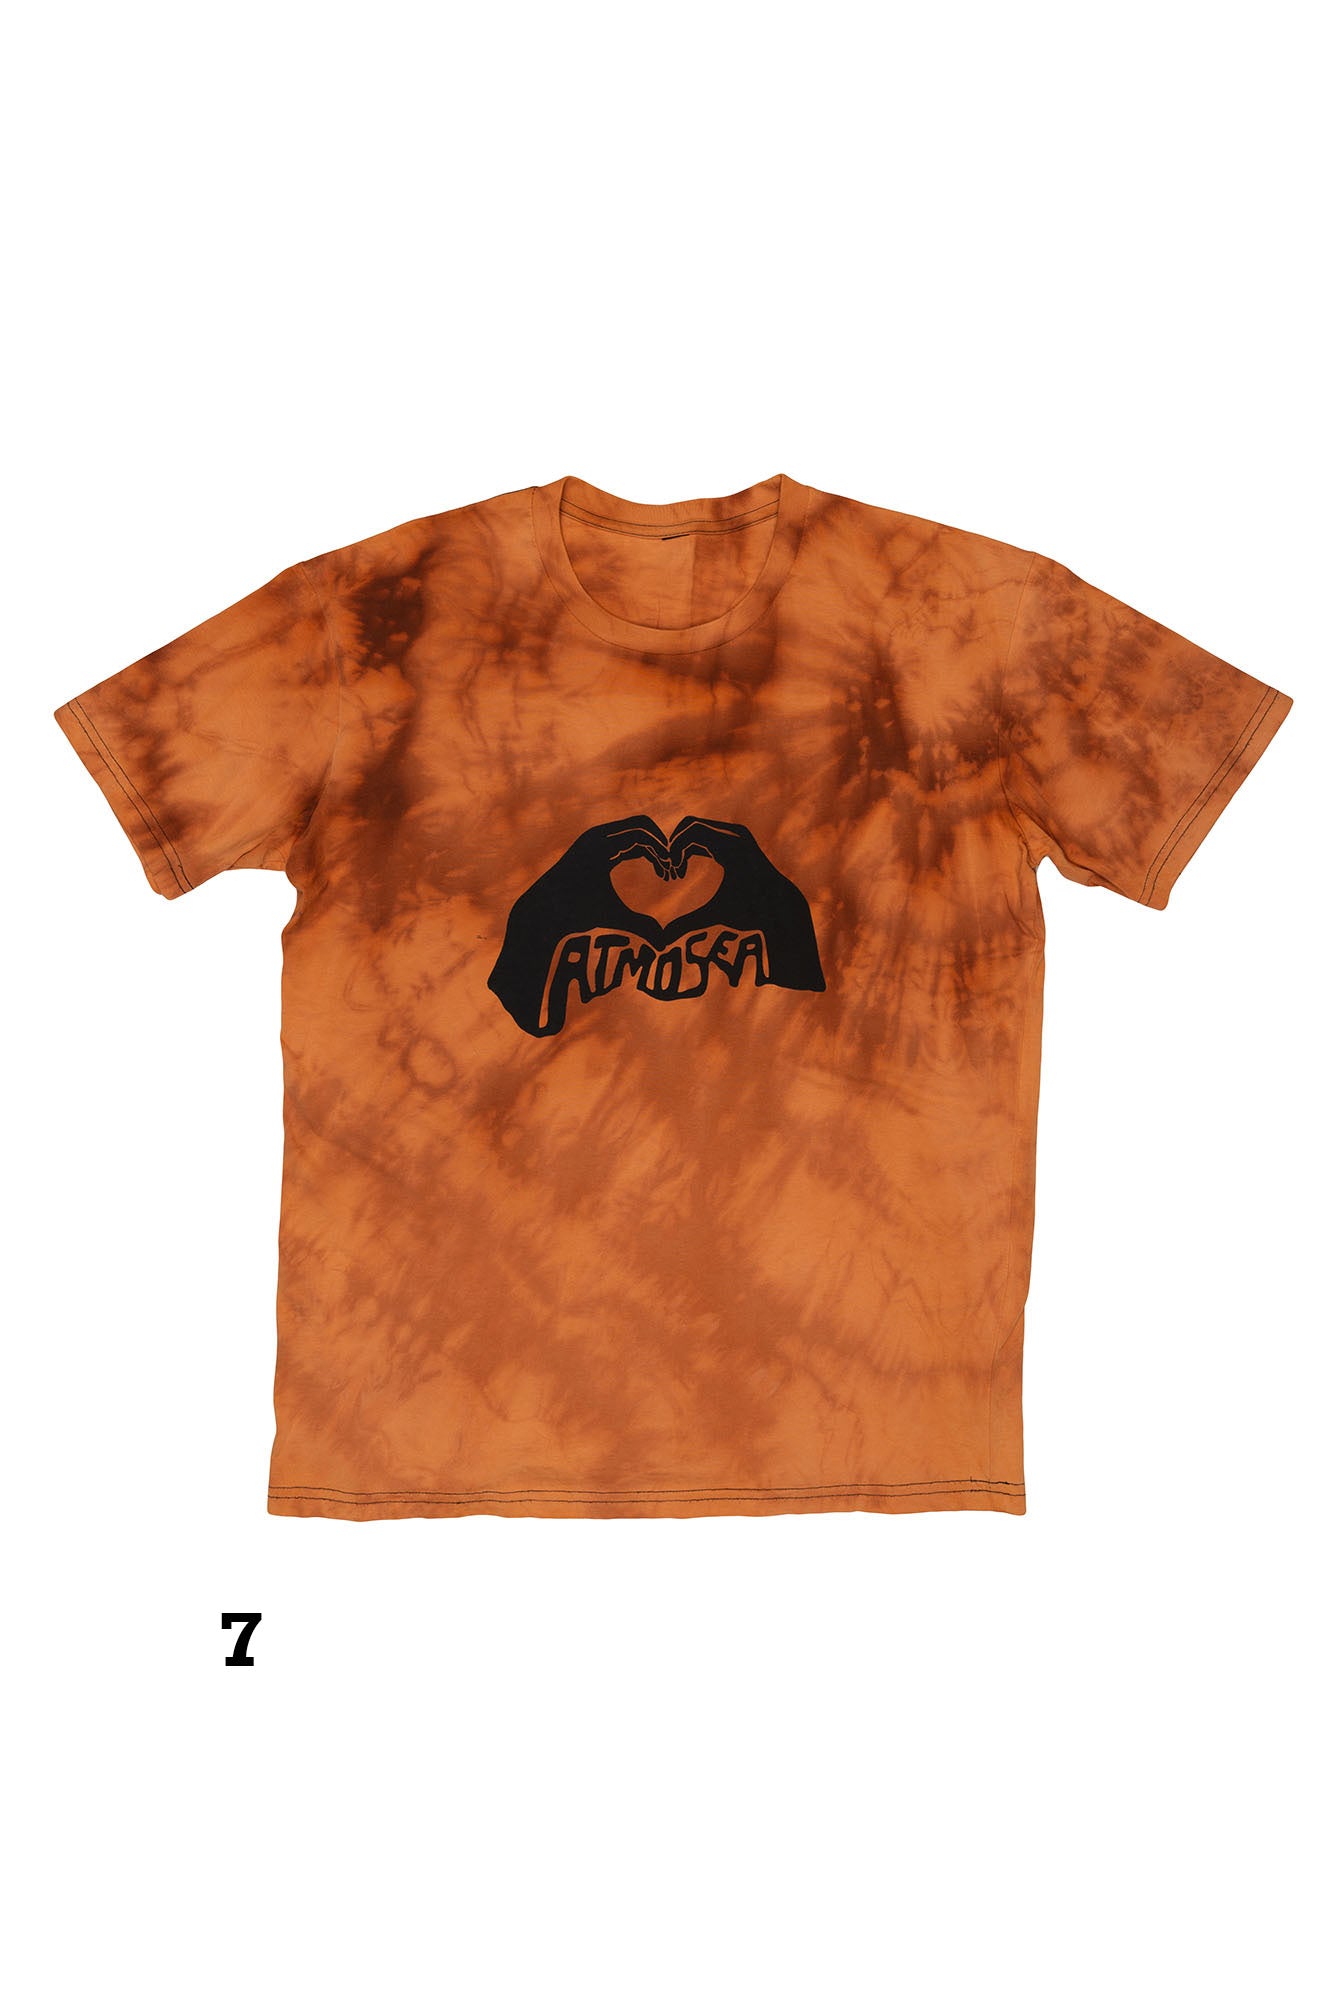 Atmosea Vintage Artist Tee -Heart- made with love by Madi Farrelly - Atmosea